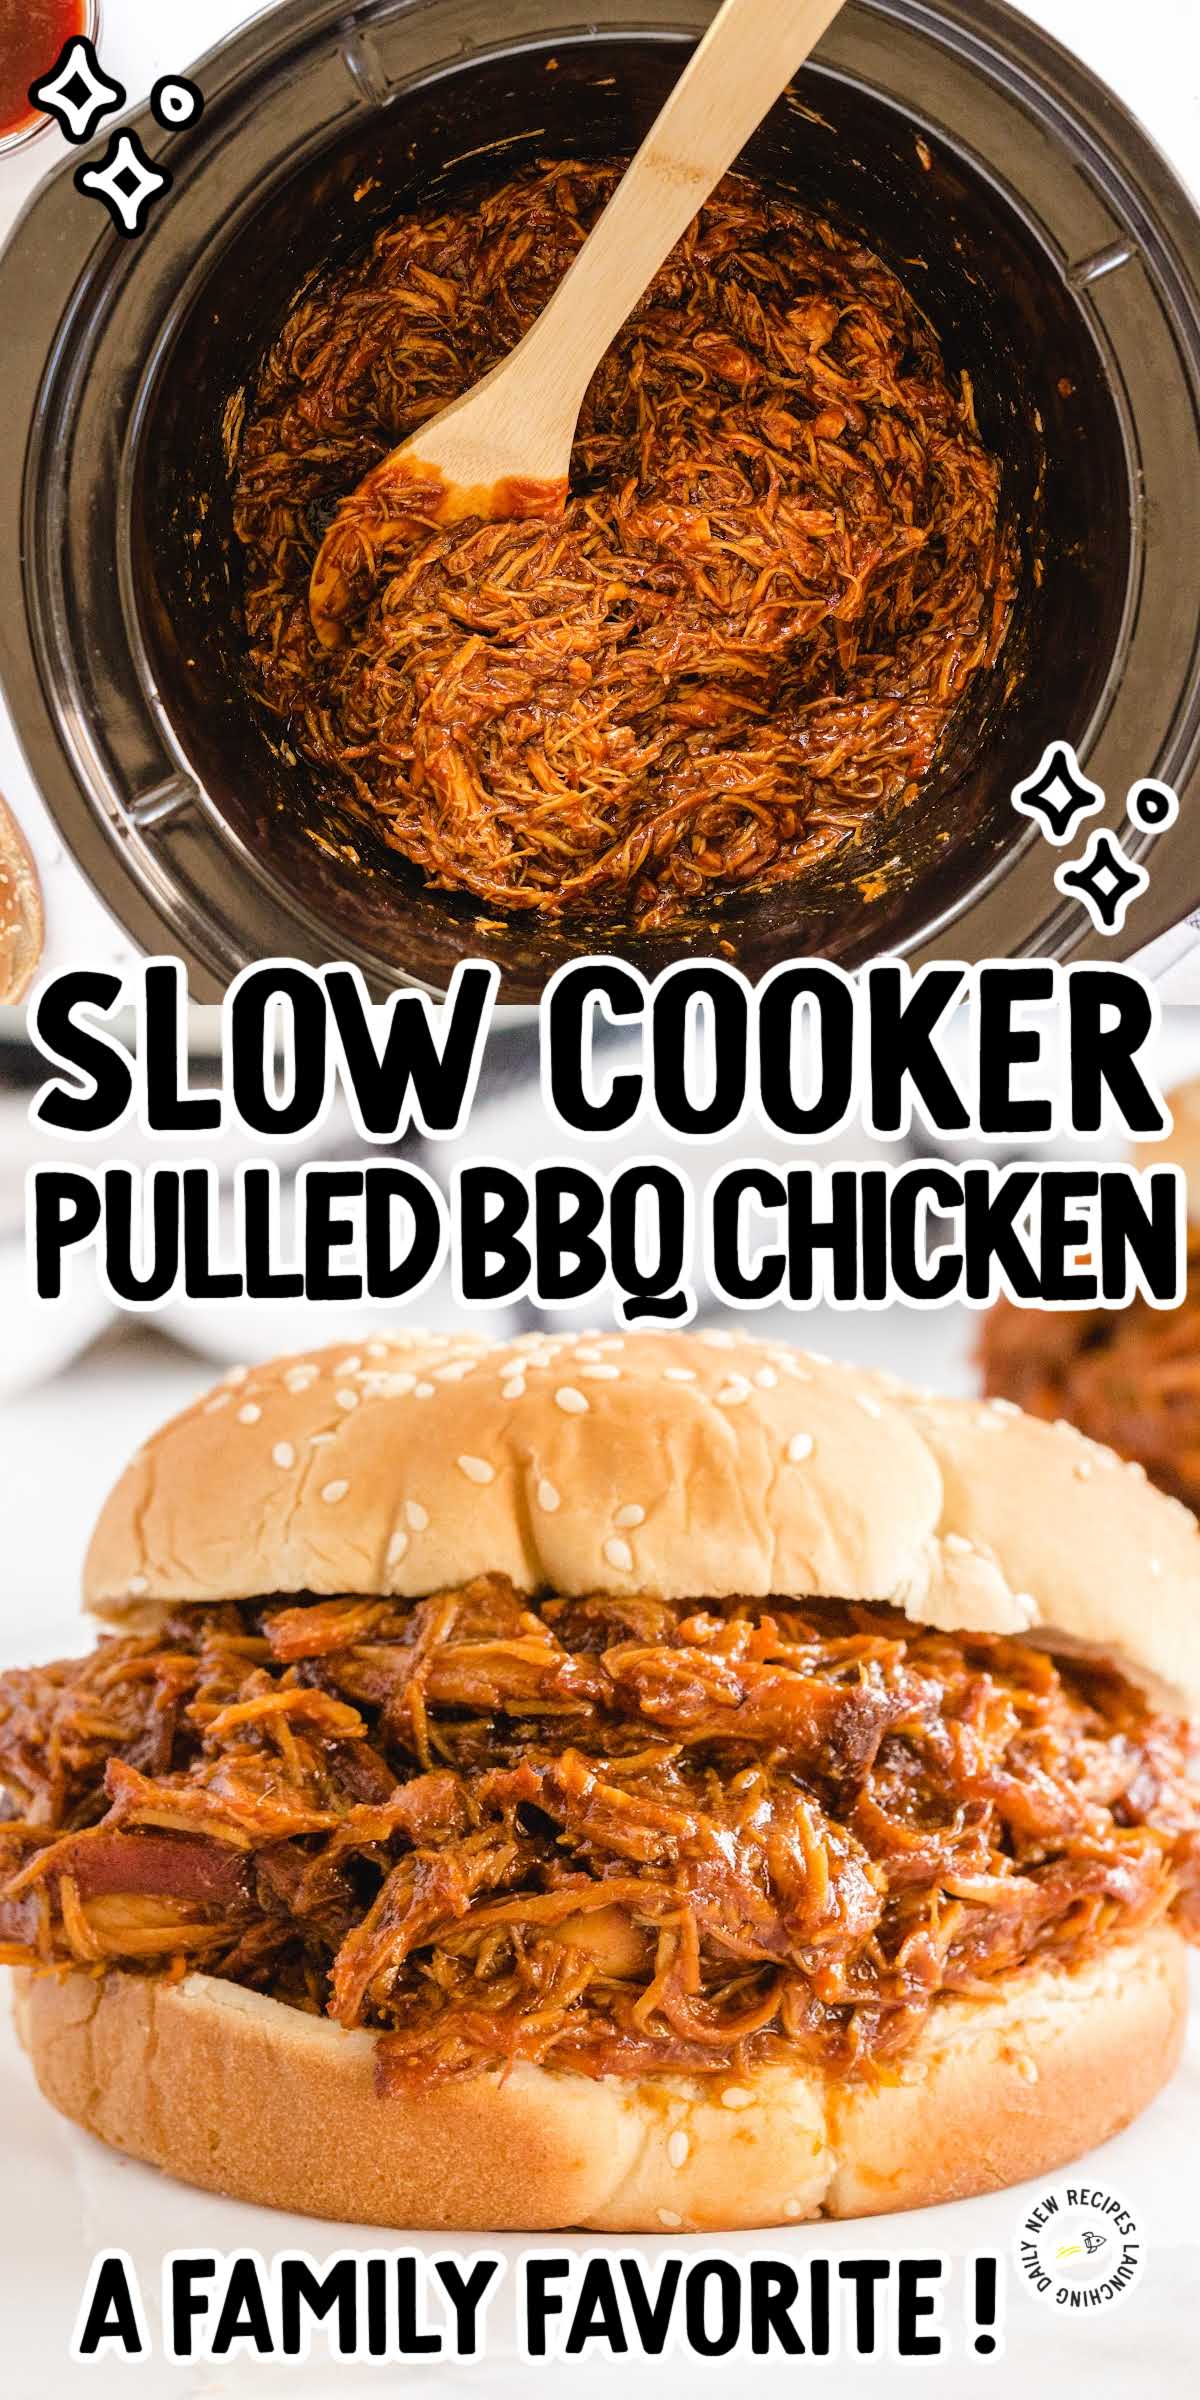 Slow Cooker Pulled Chicken Recipe - Spaceships and Laser Beams